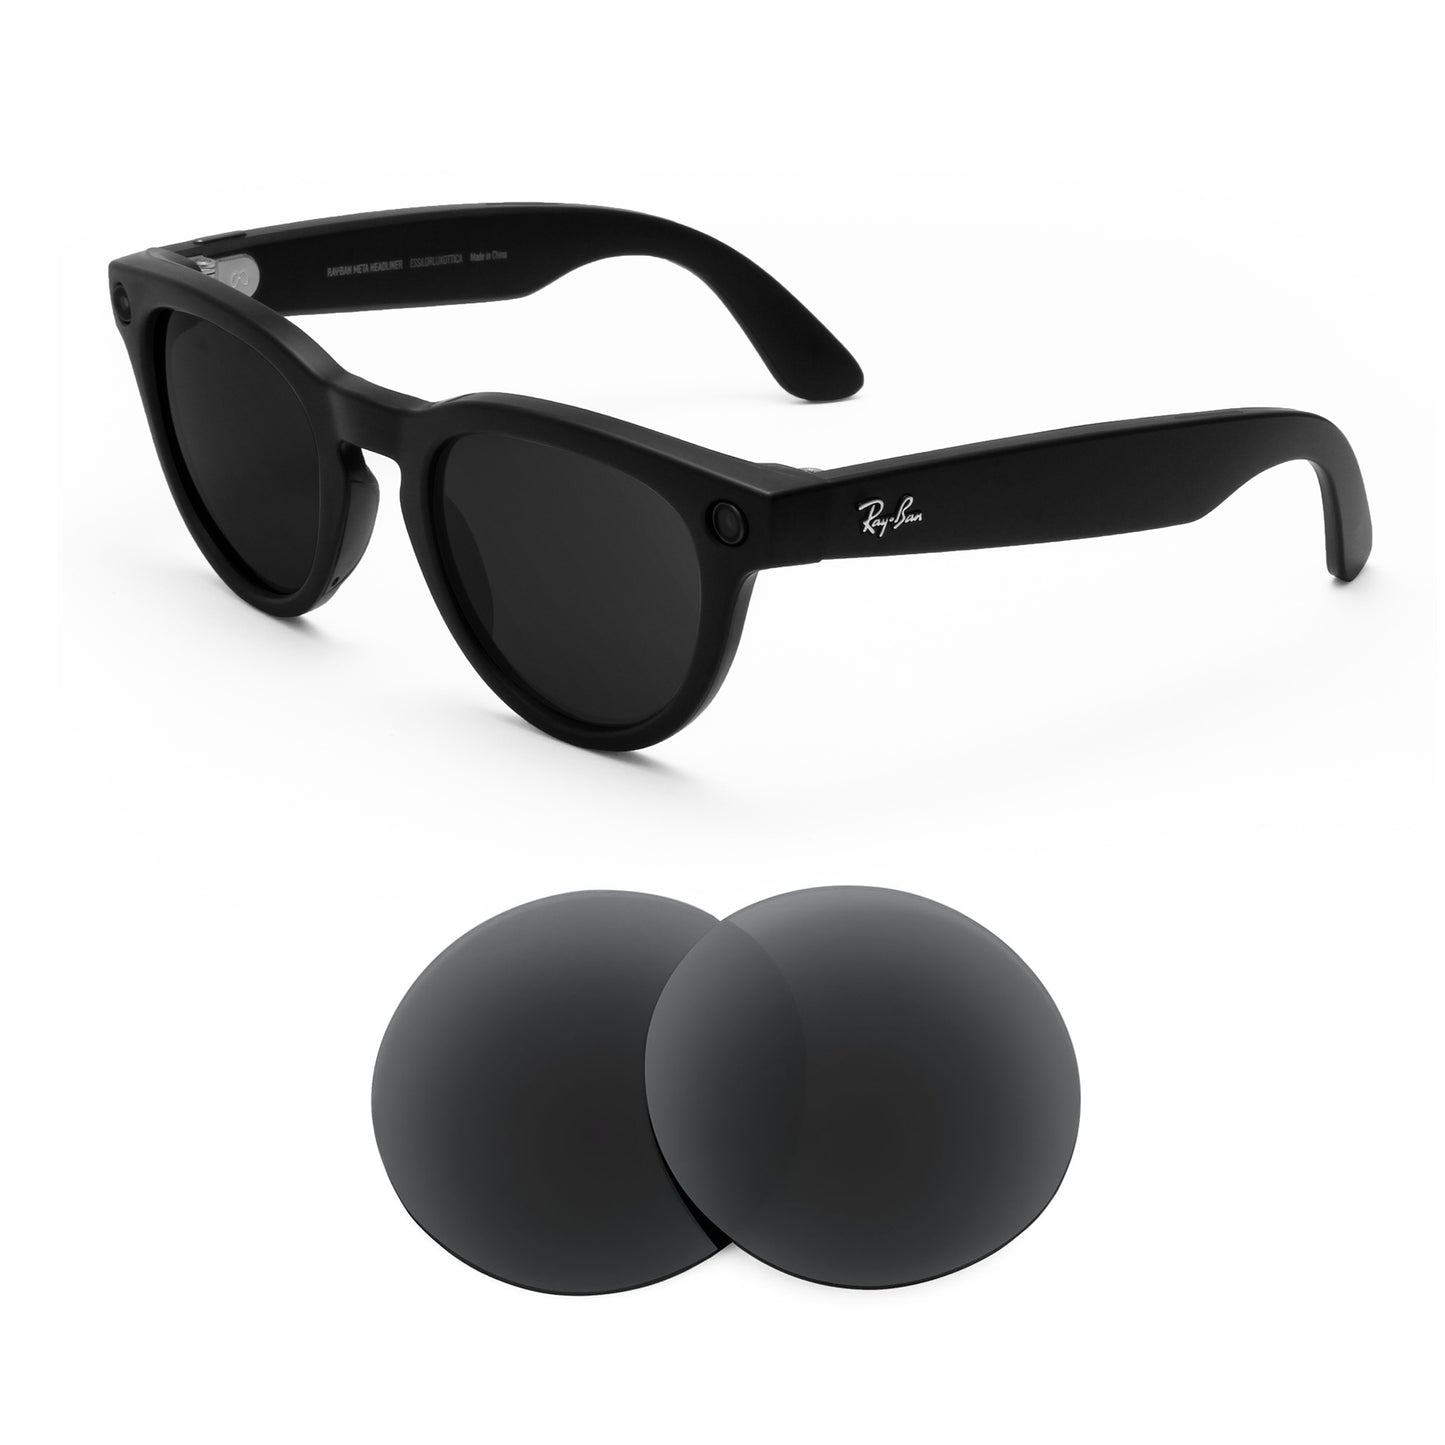 Ray-Ban Meta Headliner sunglasses with replacement lenses